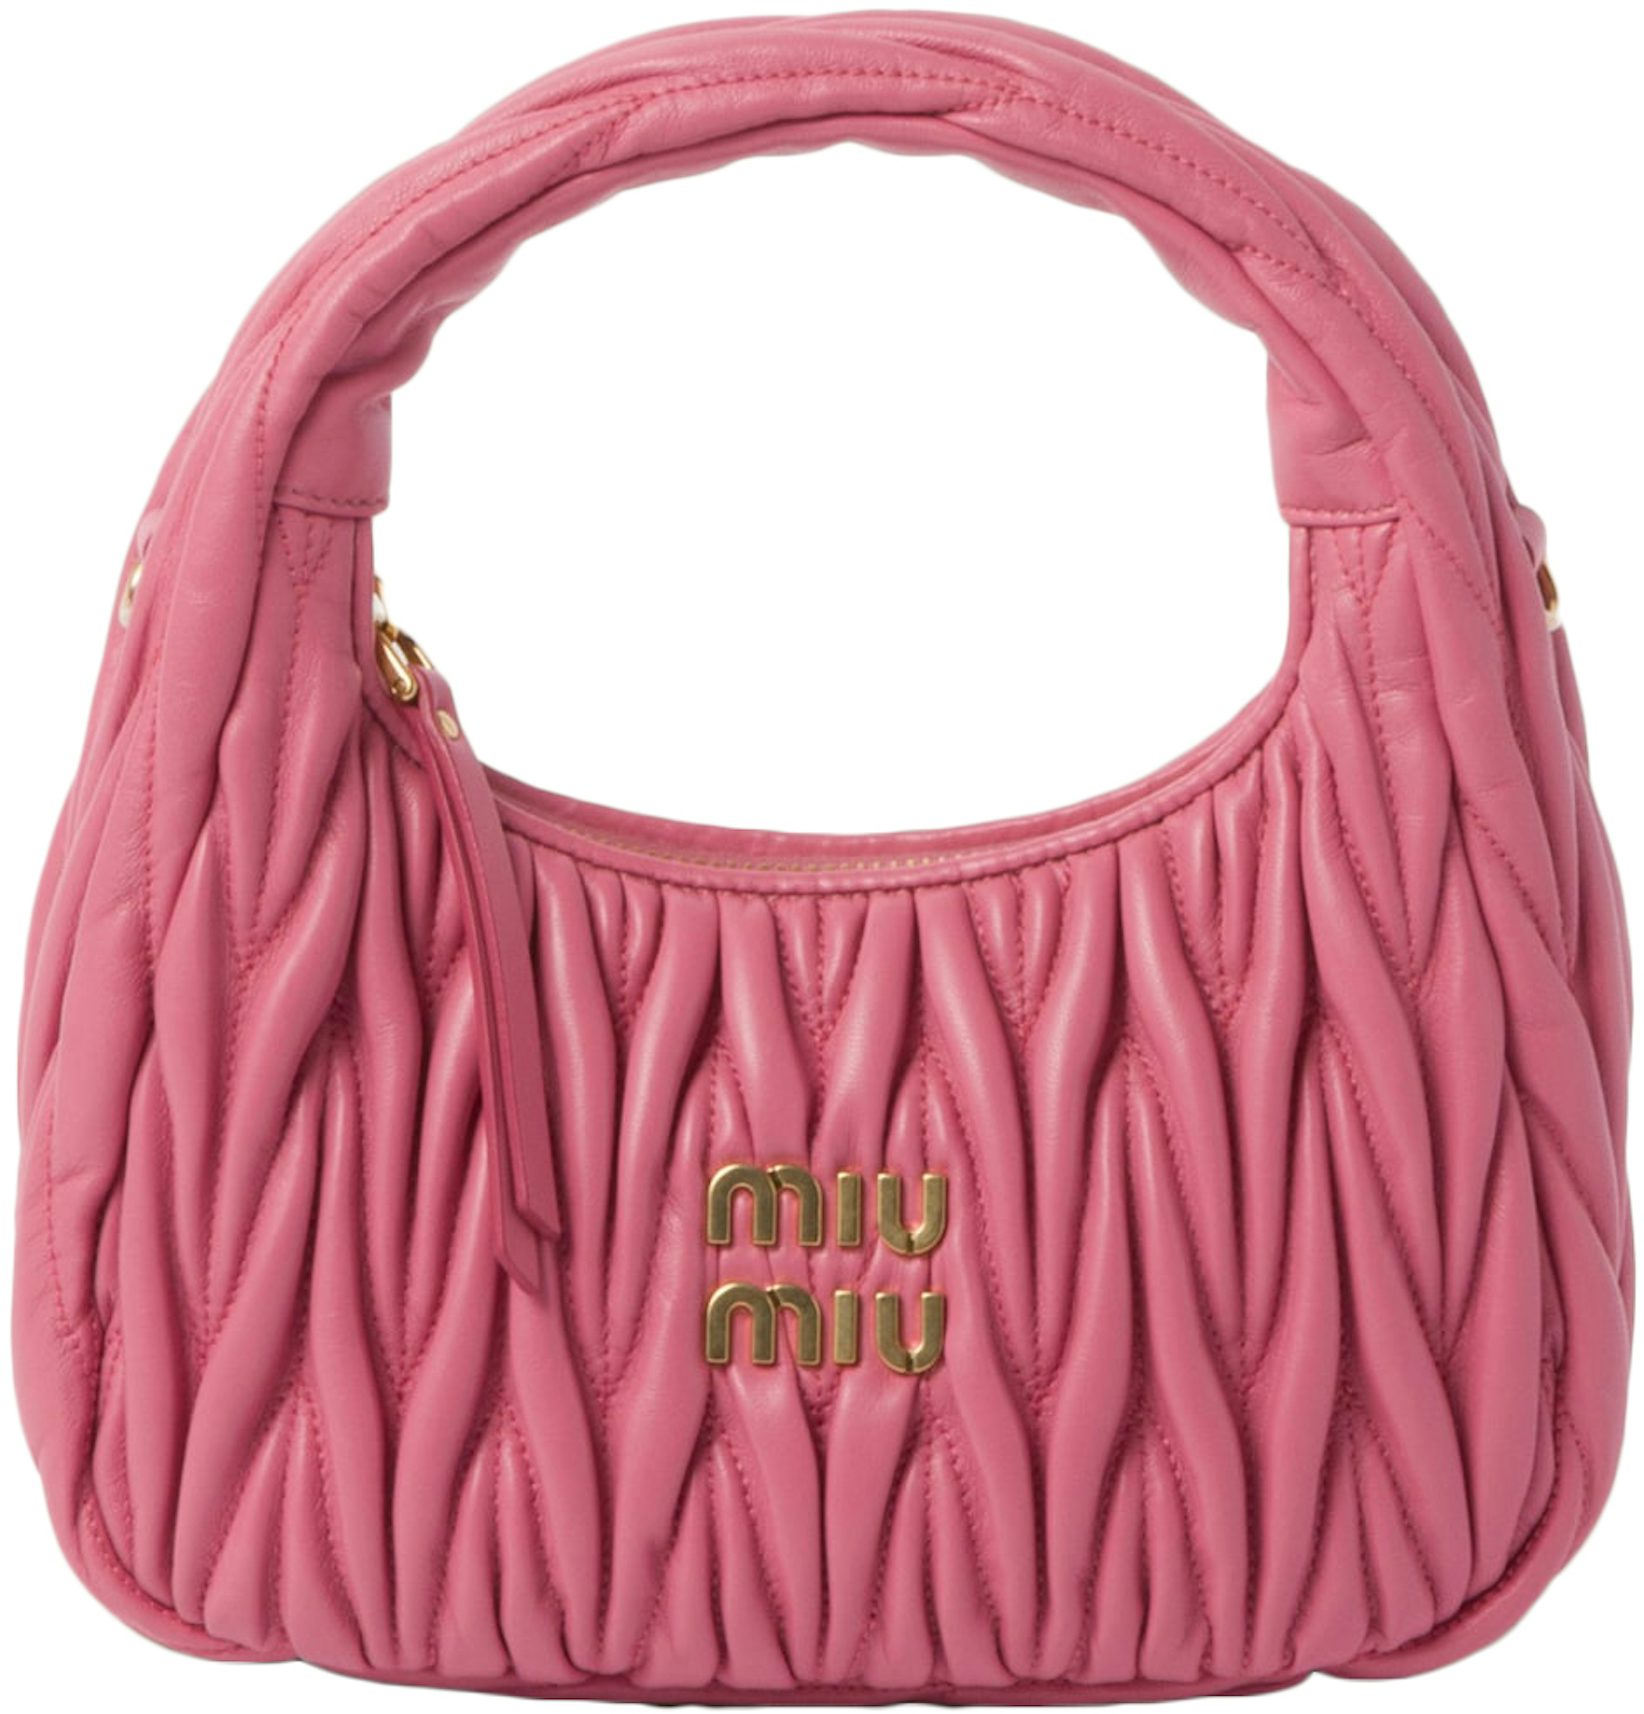 The Miu Miu Wander Bag: History, Price, & More Details To Know